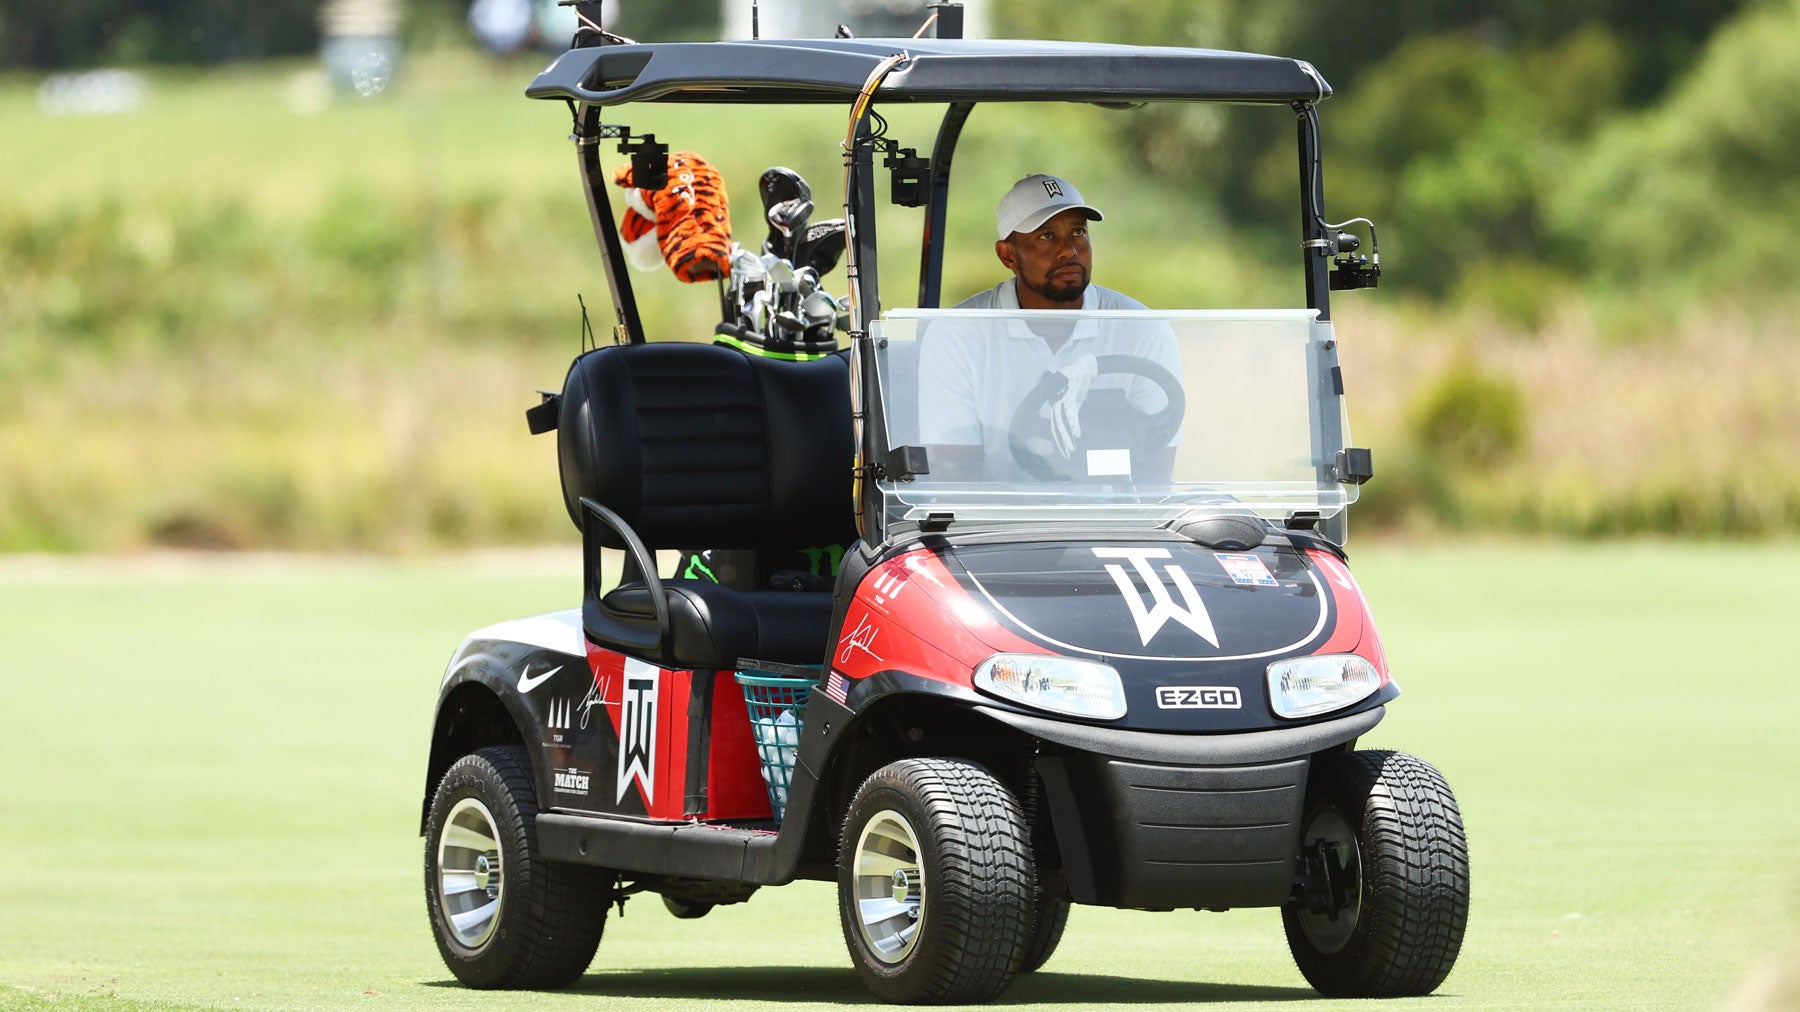 Tiger Woods taking a cart on Tour? He had a firm opinion on the matter.